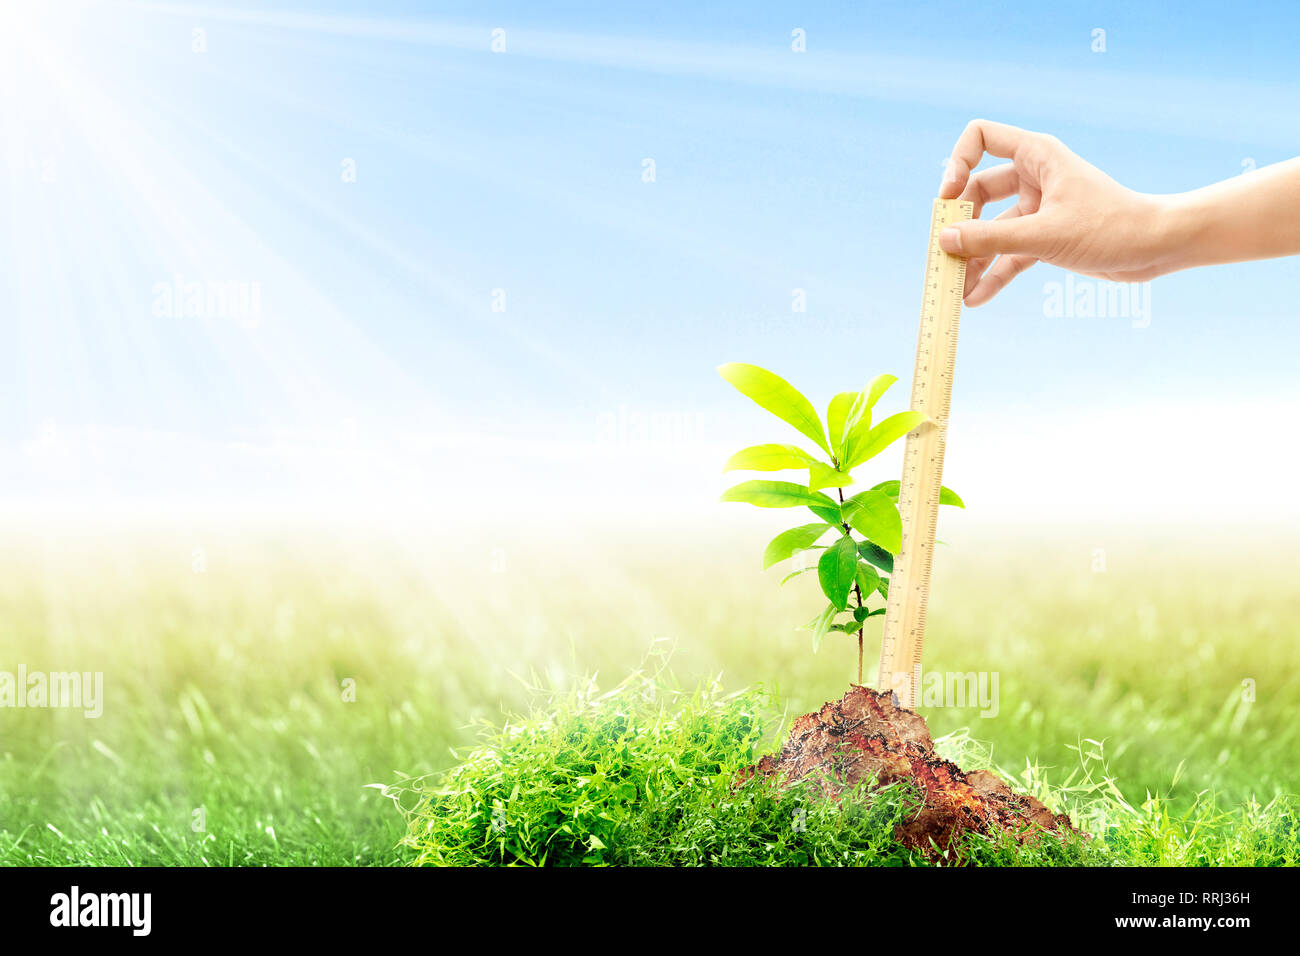 Female hand with a ruler measuring her growing plant height on fertile soil in meadow with sunlight and blue sky background. Earth day concept Stock Photo